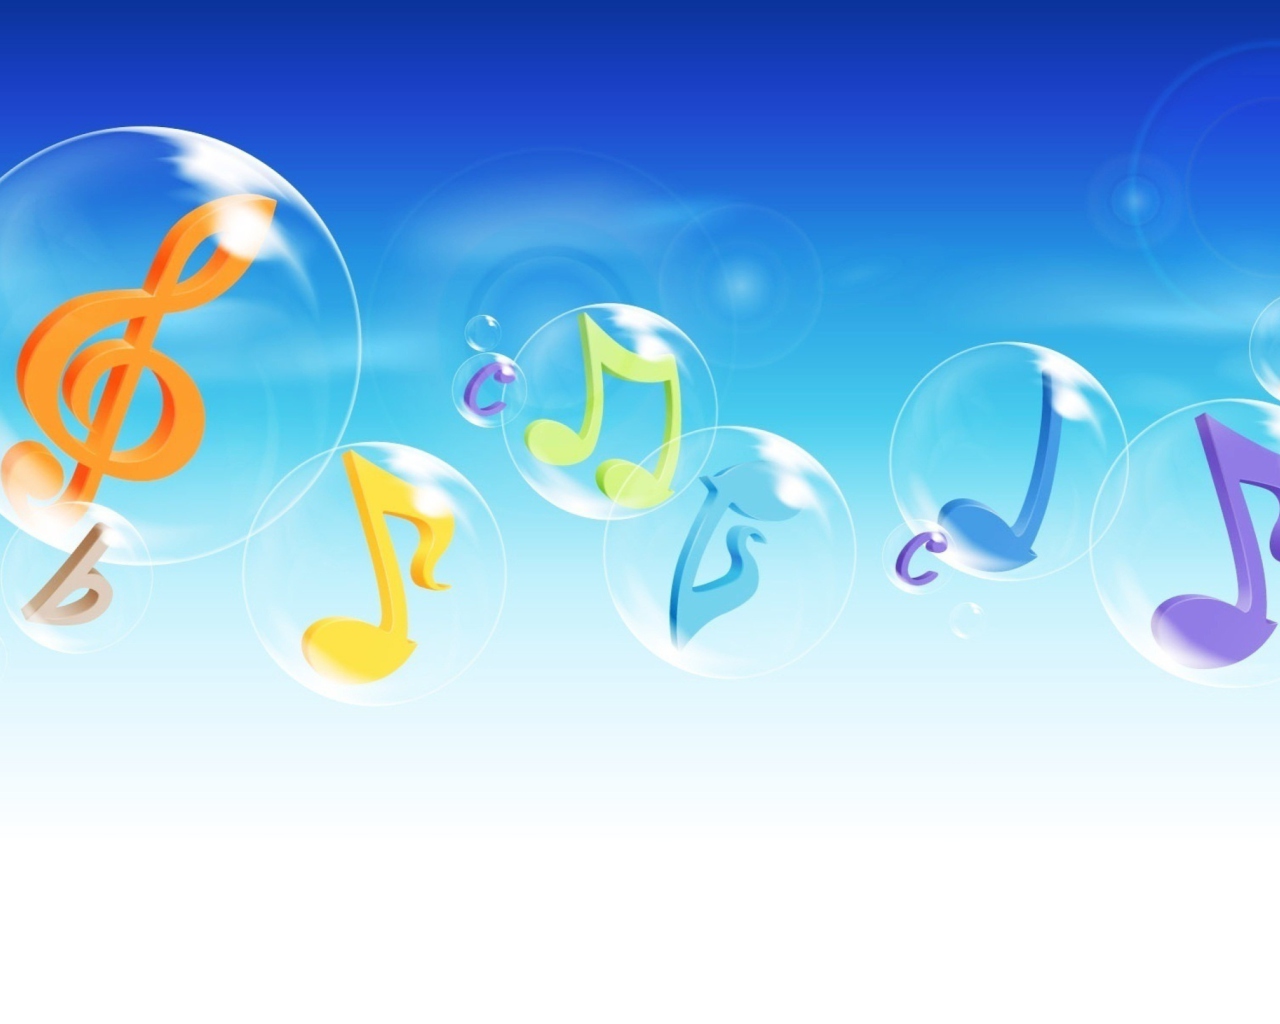 Musical Notes In Bubbles screenshot #1 1280x1024